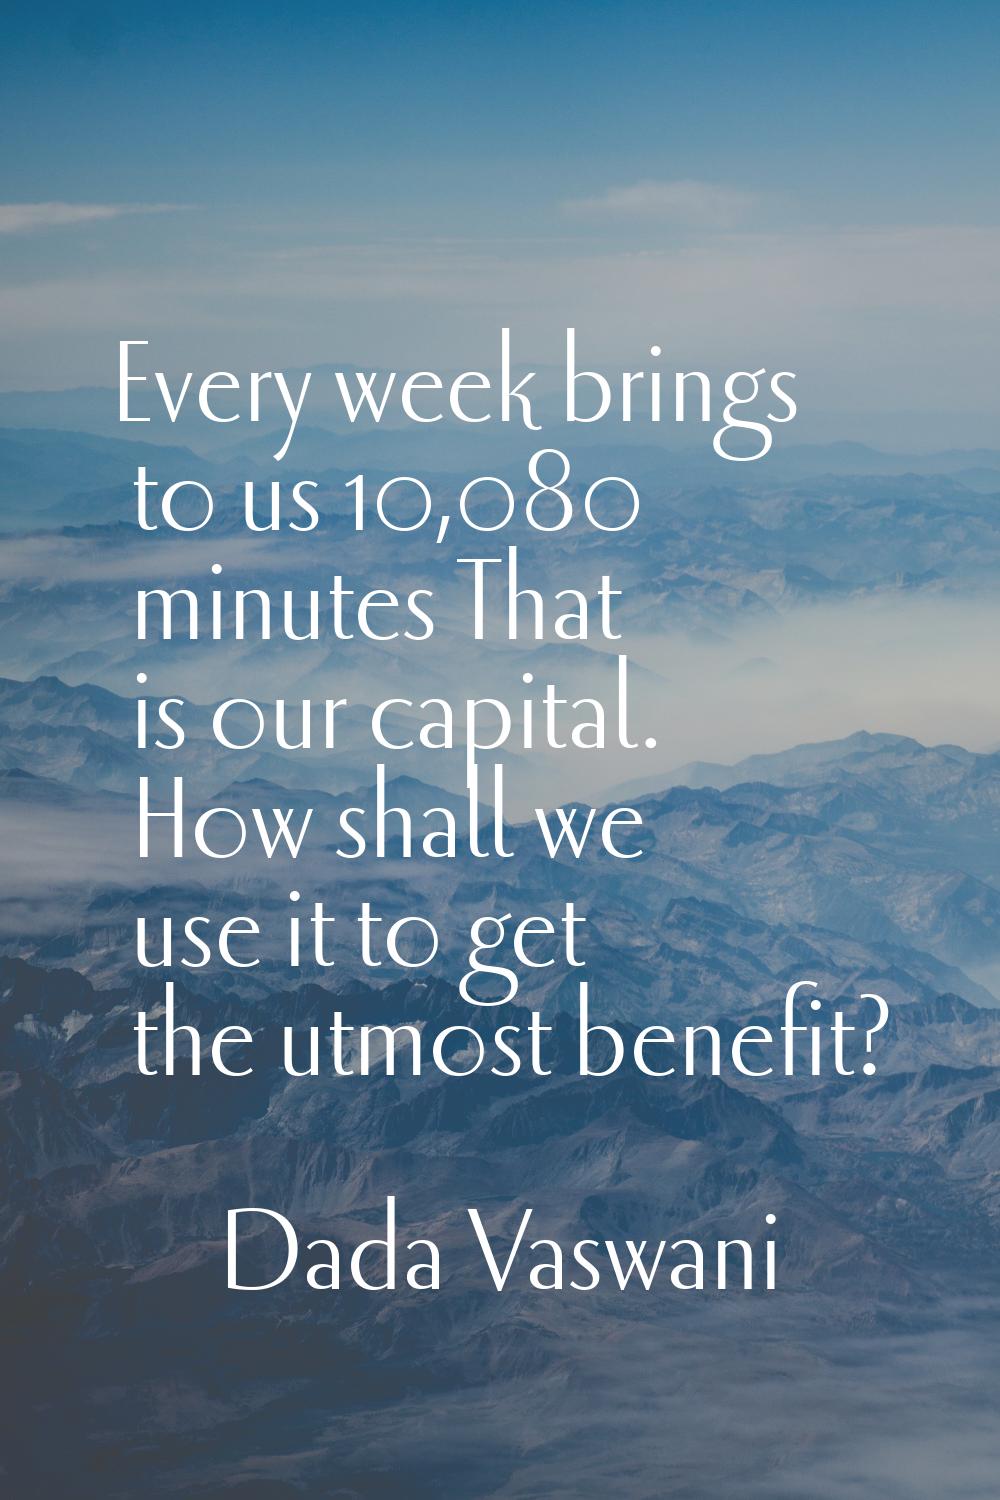 Every week brings to us 10,080 minutes That is our capital. How shall we use it to get the utmost b